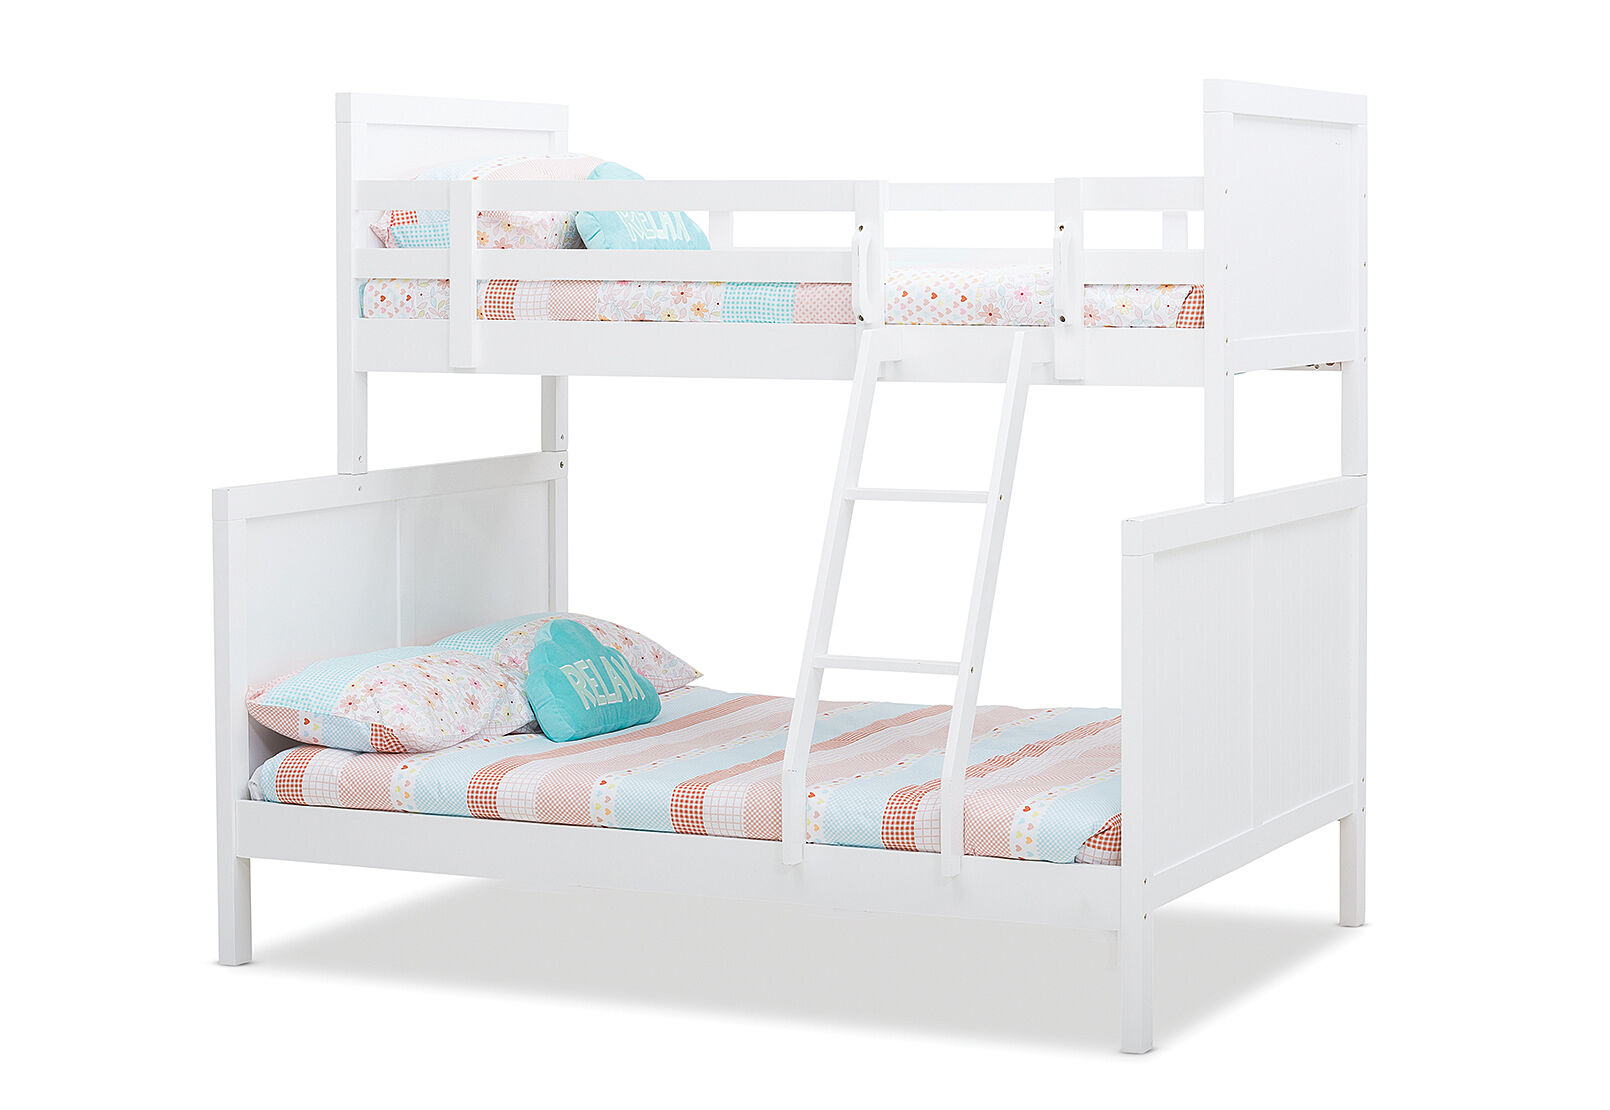 Double Bunk Bed Amart Furniture, Captains Bunk Bed With Trundle